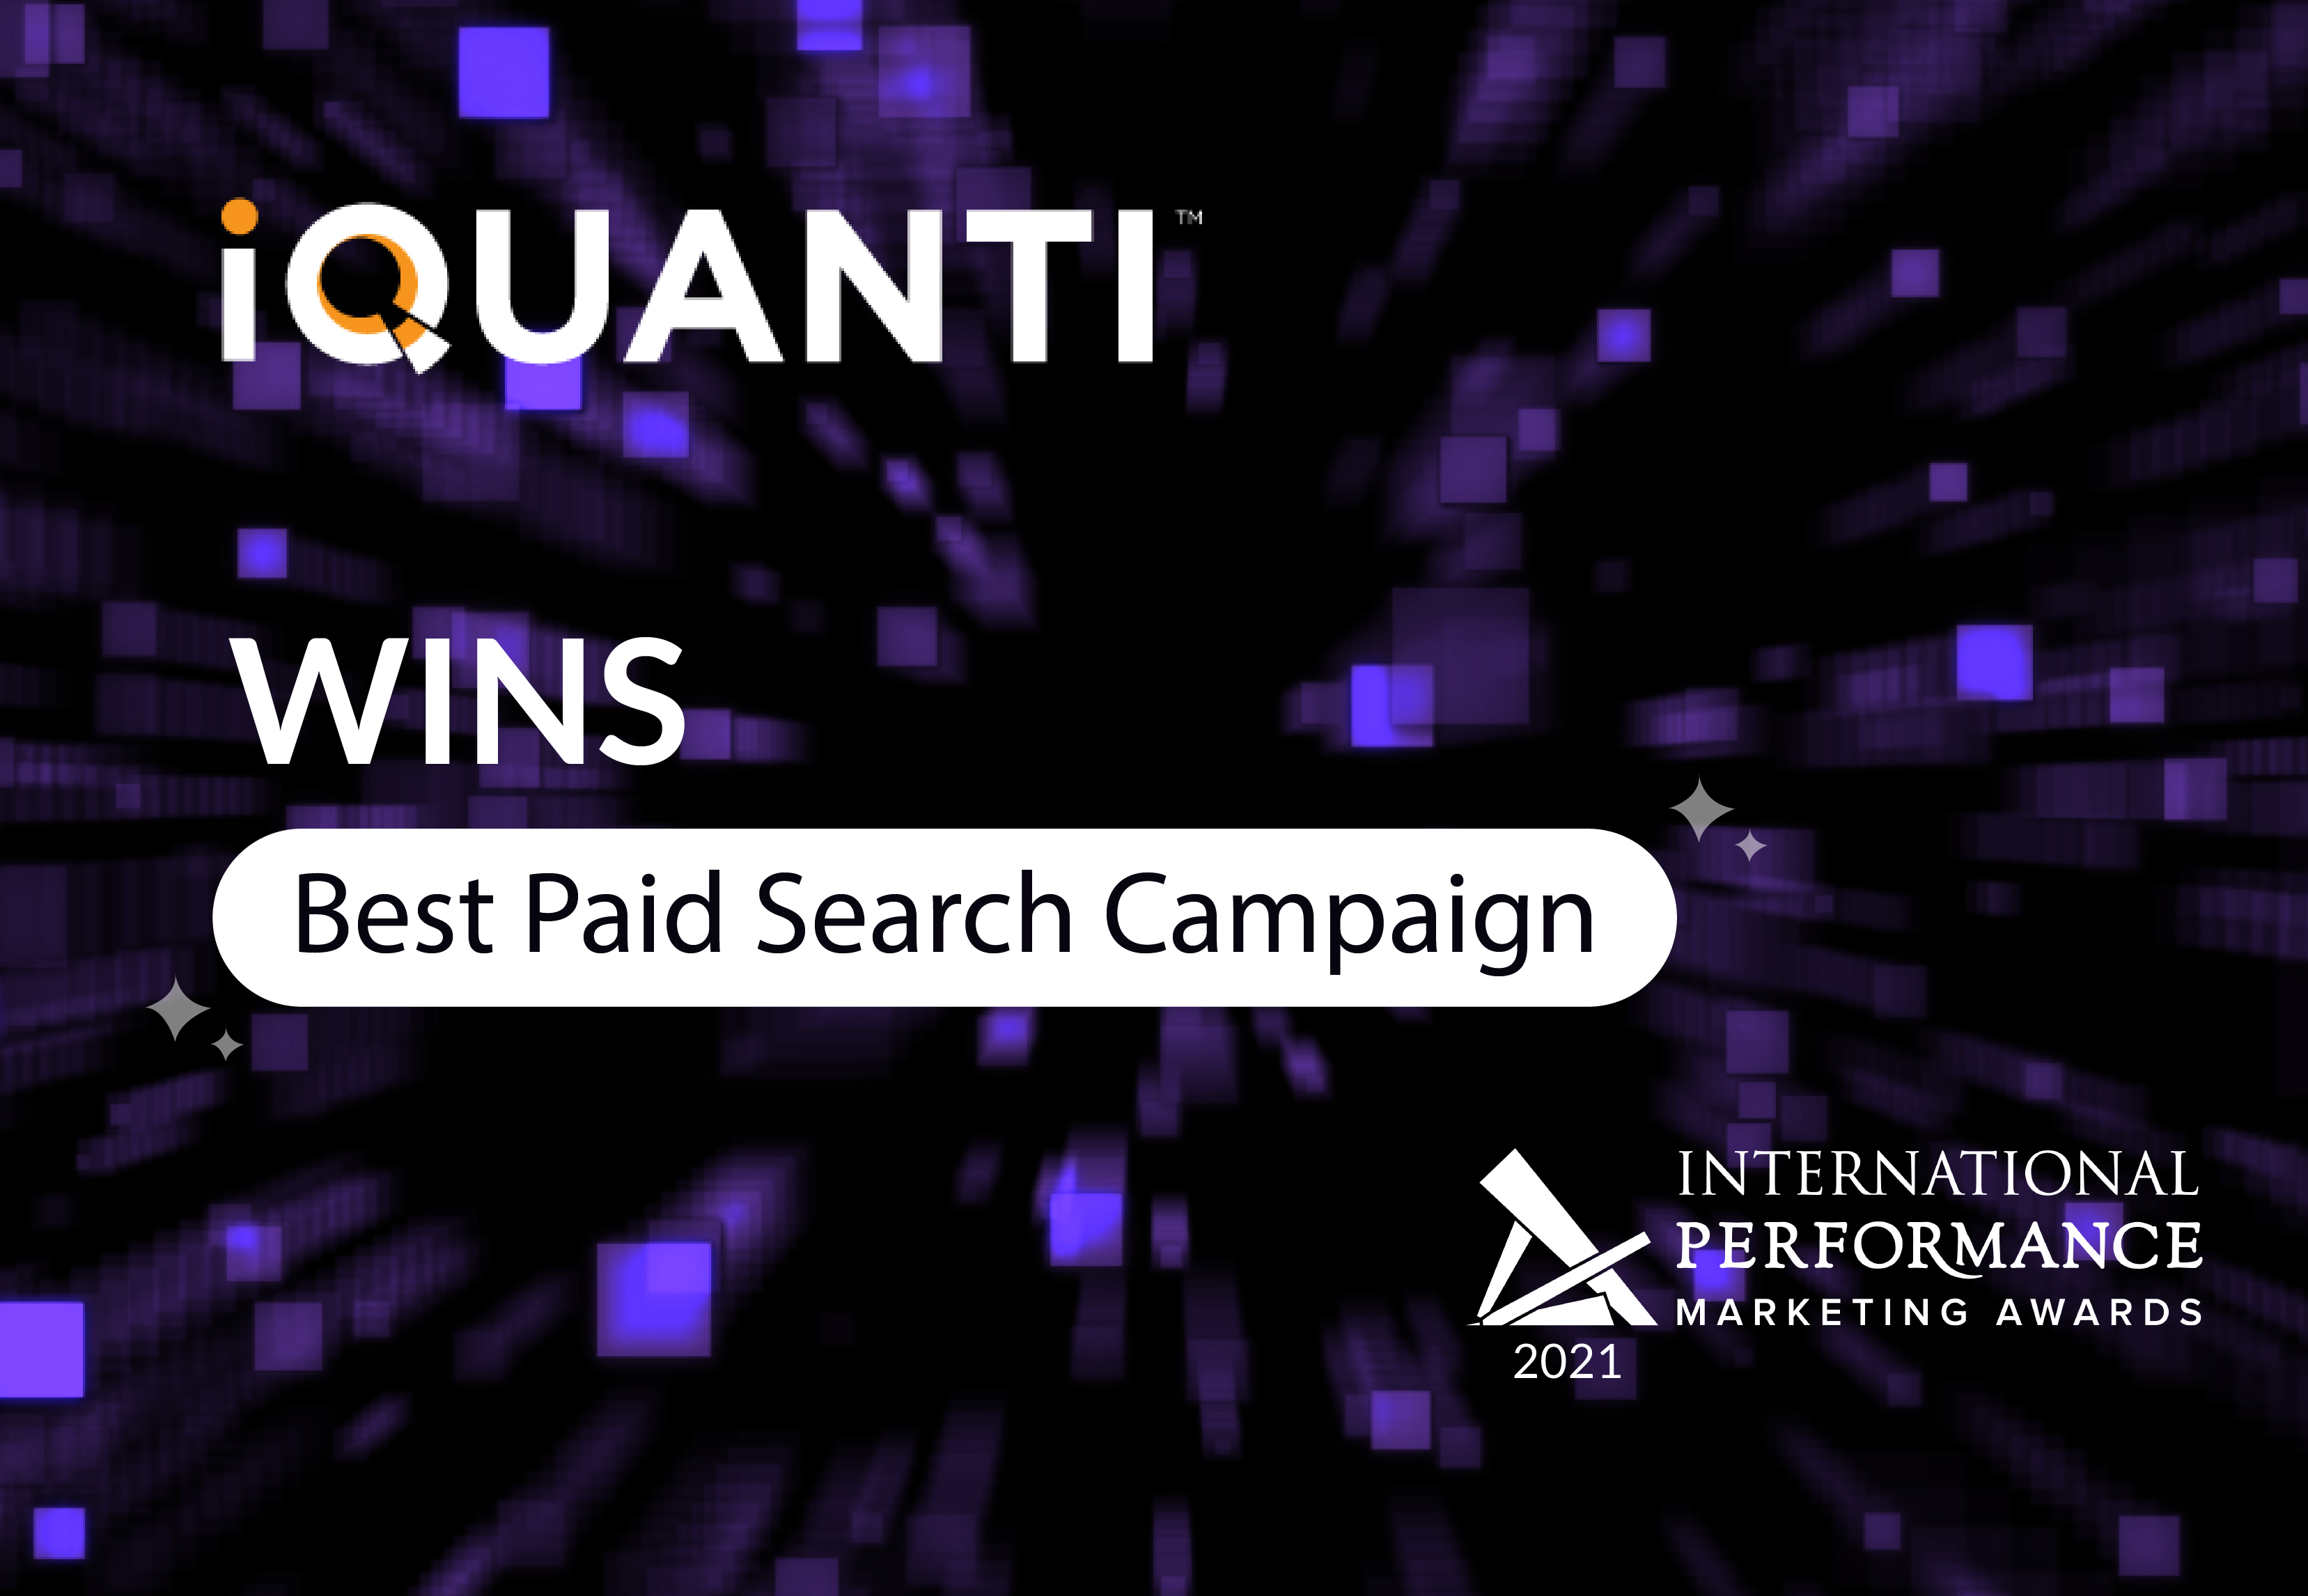 iQuanti Wins at IPMA 2021 for Best Paid Search Campaign